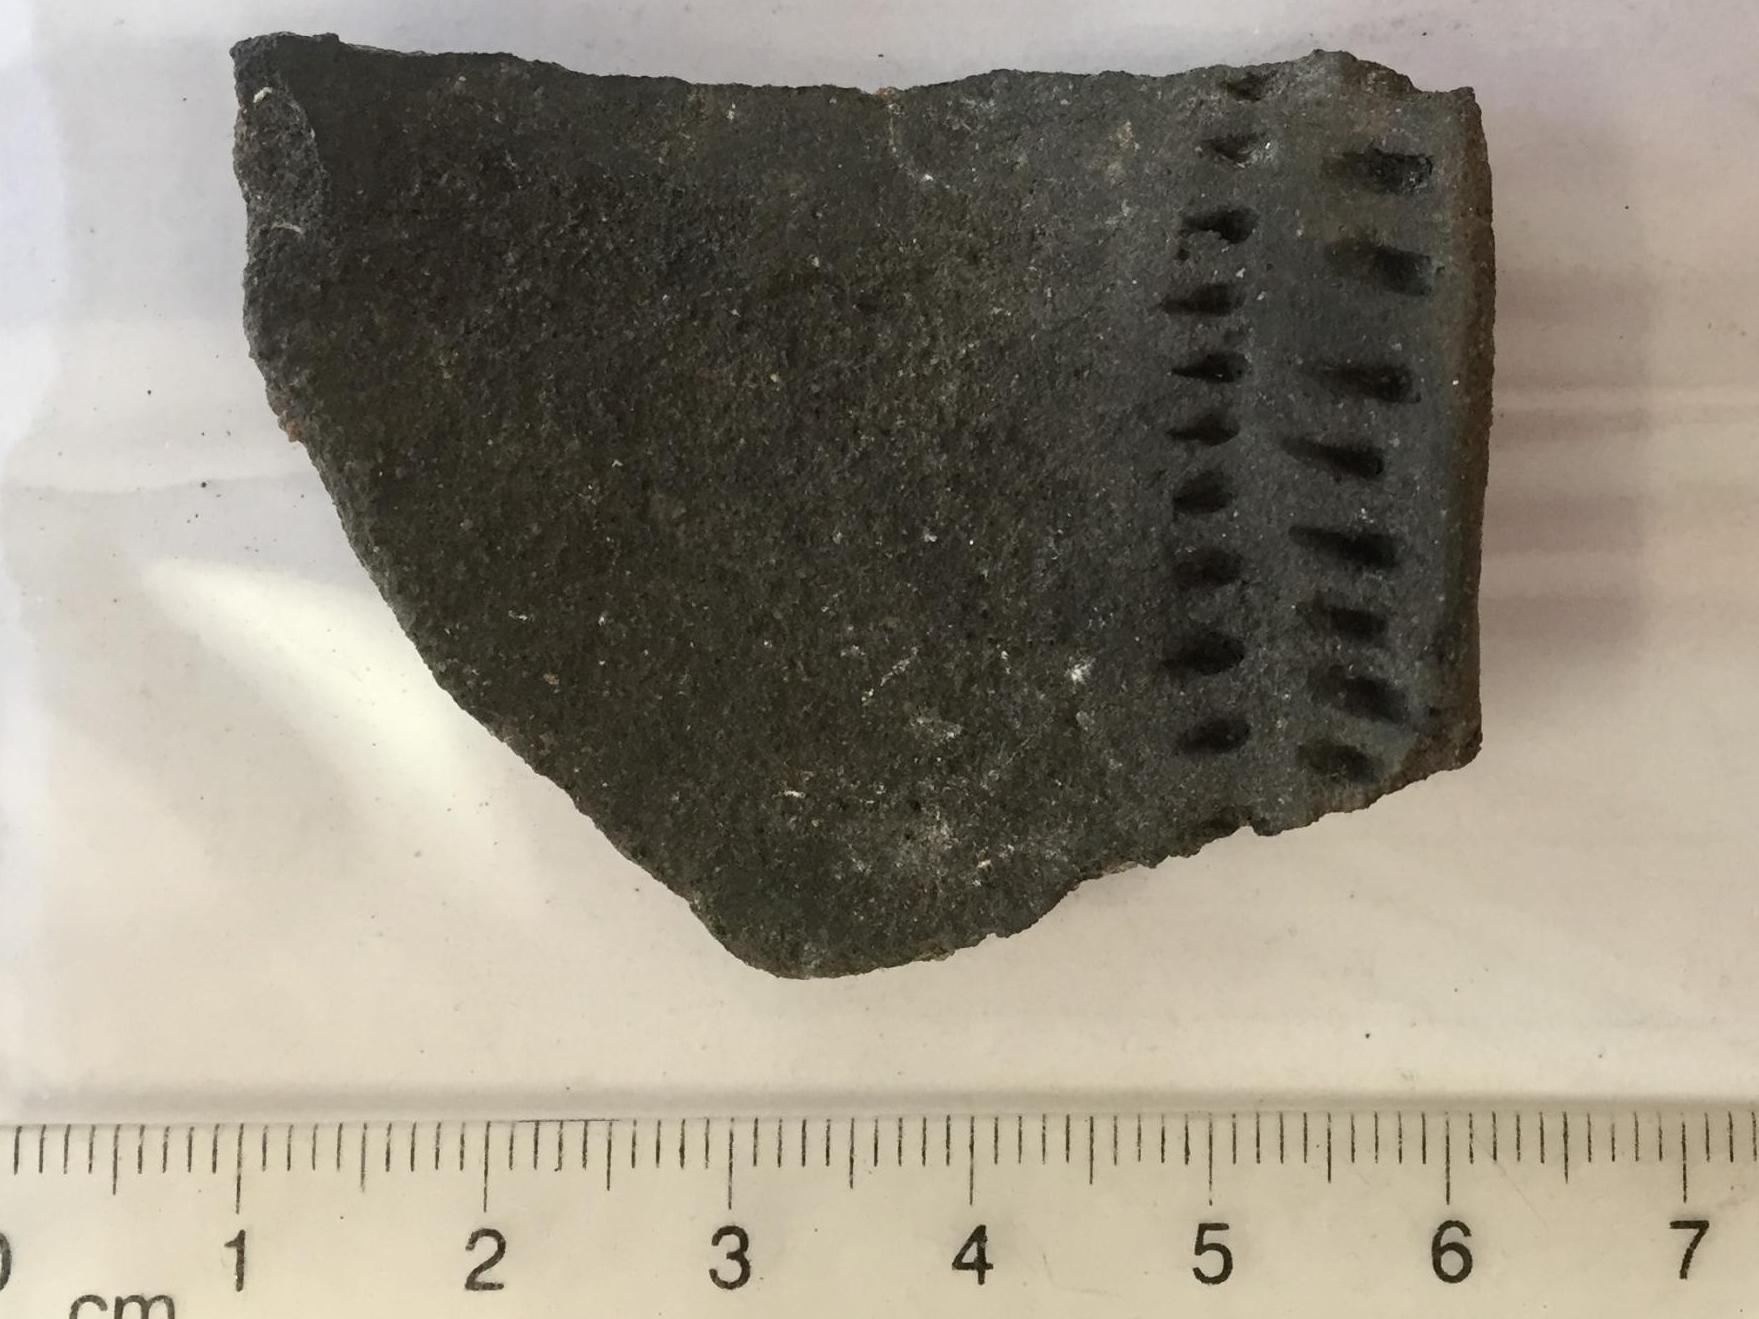 A fragment of pottery